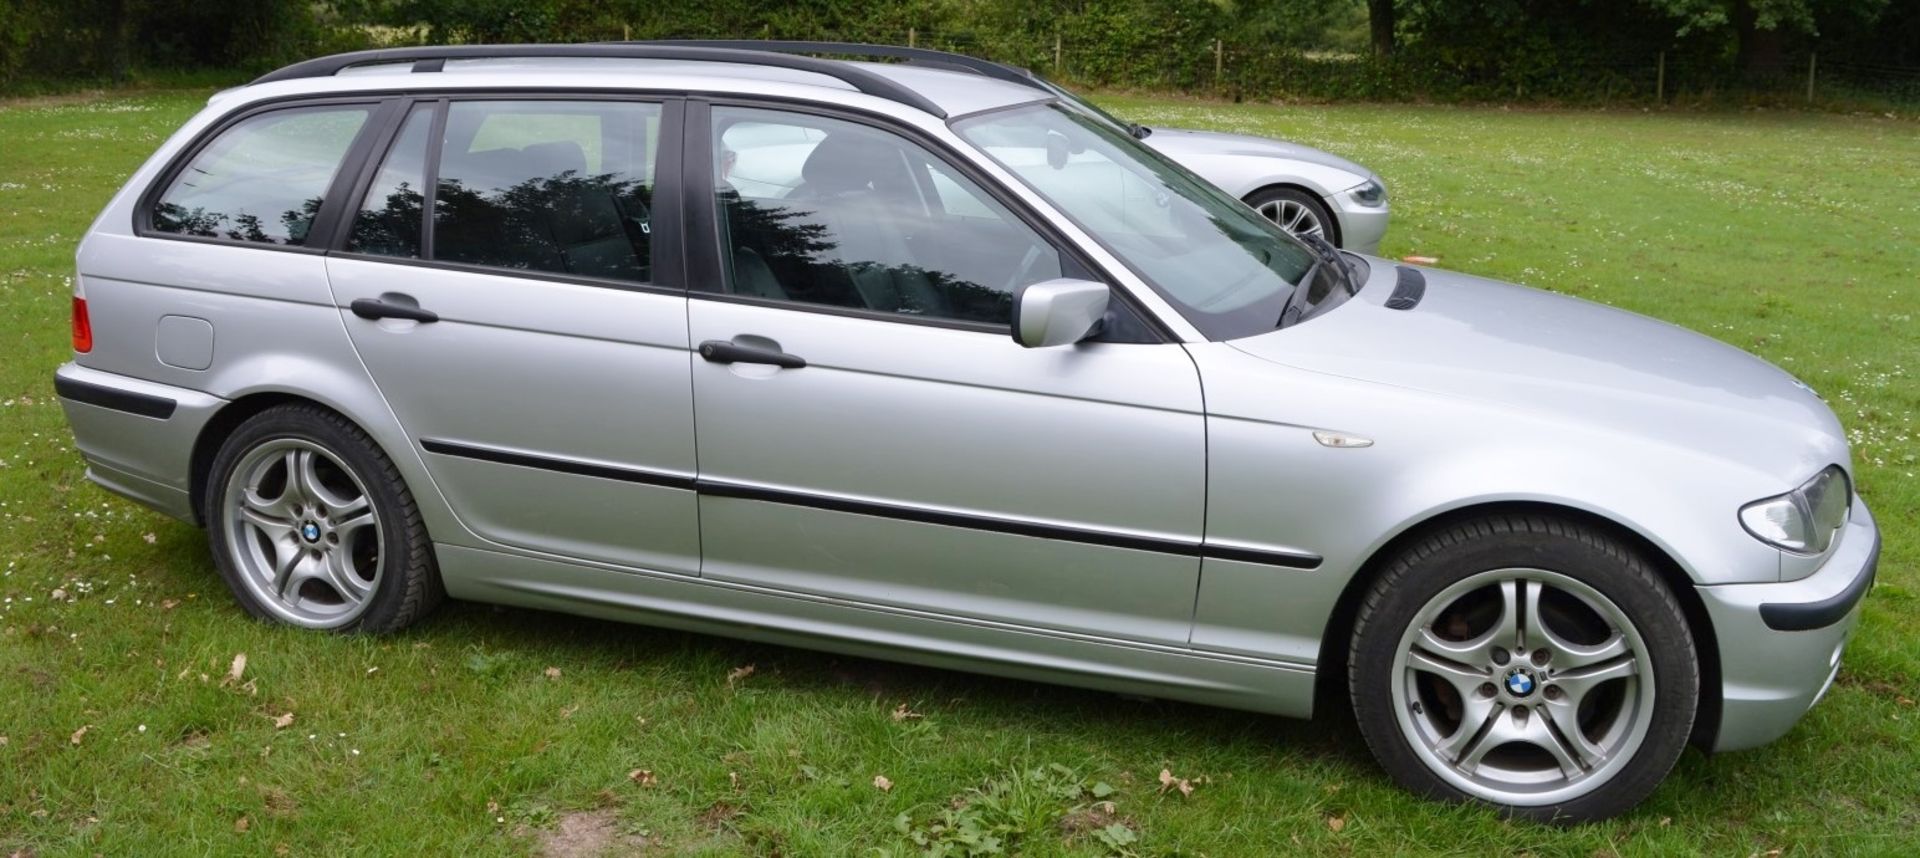 1 x BMW 316 I Se Touring Auto - 2002-  Private Registration - 74,400 Miles - Long MOT Expires May - Image 4 of 32